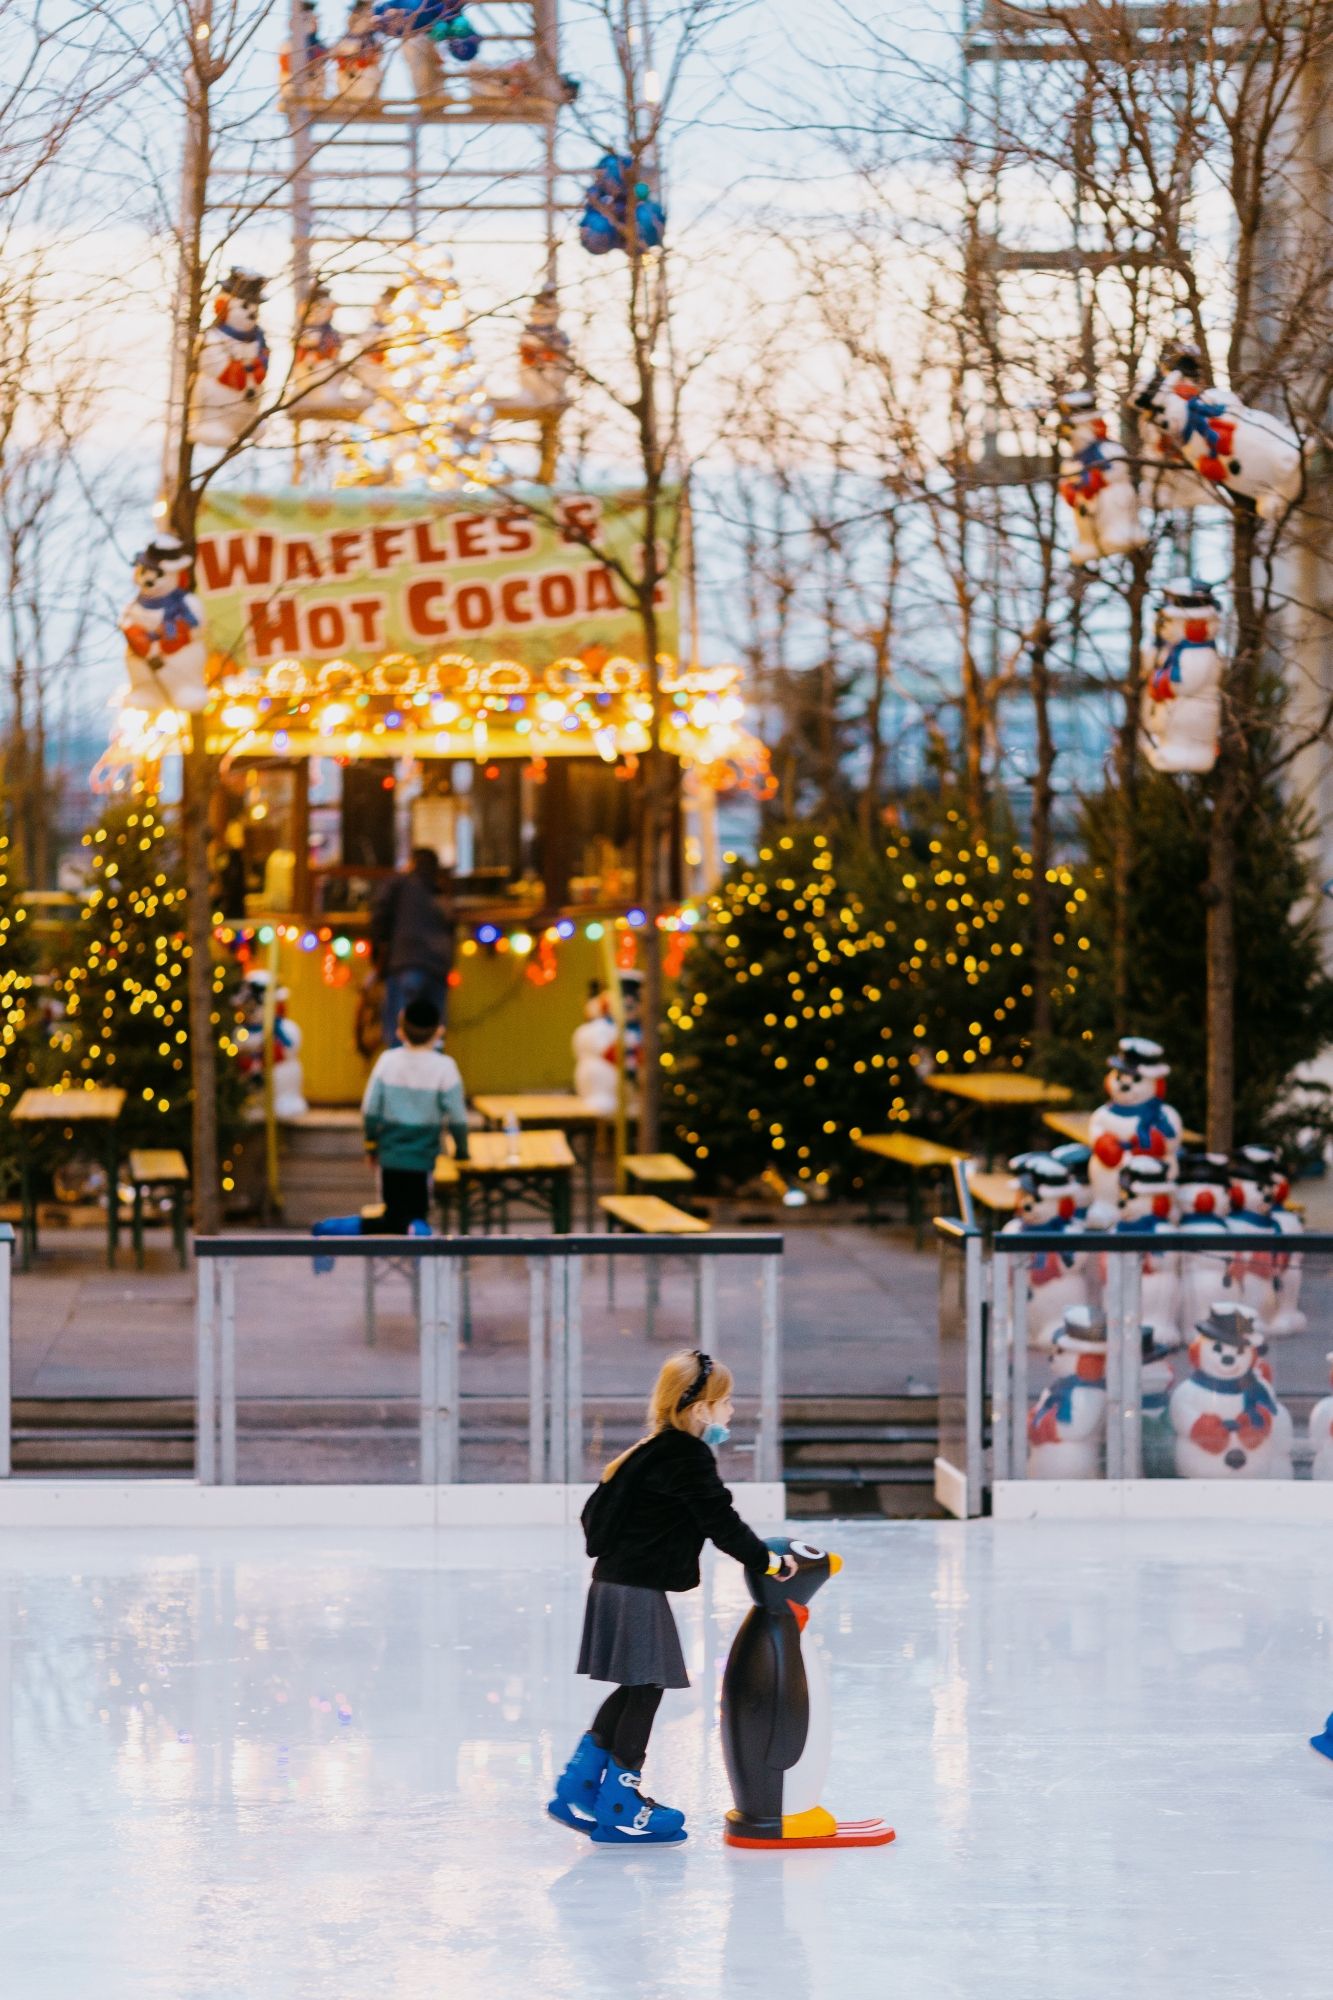 A child is ice skating.